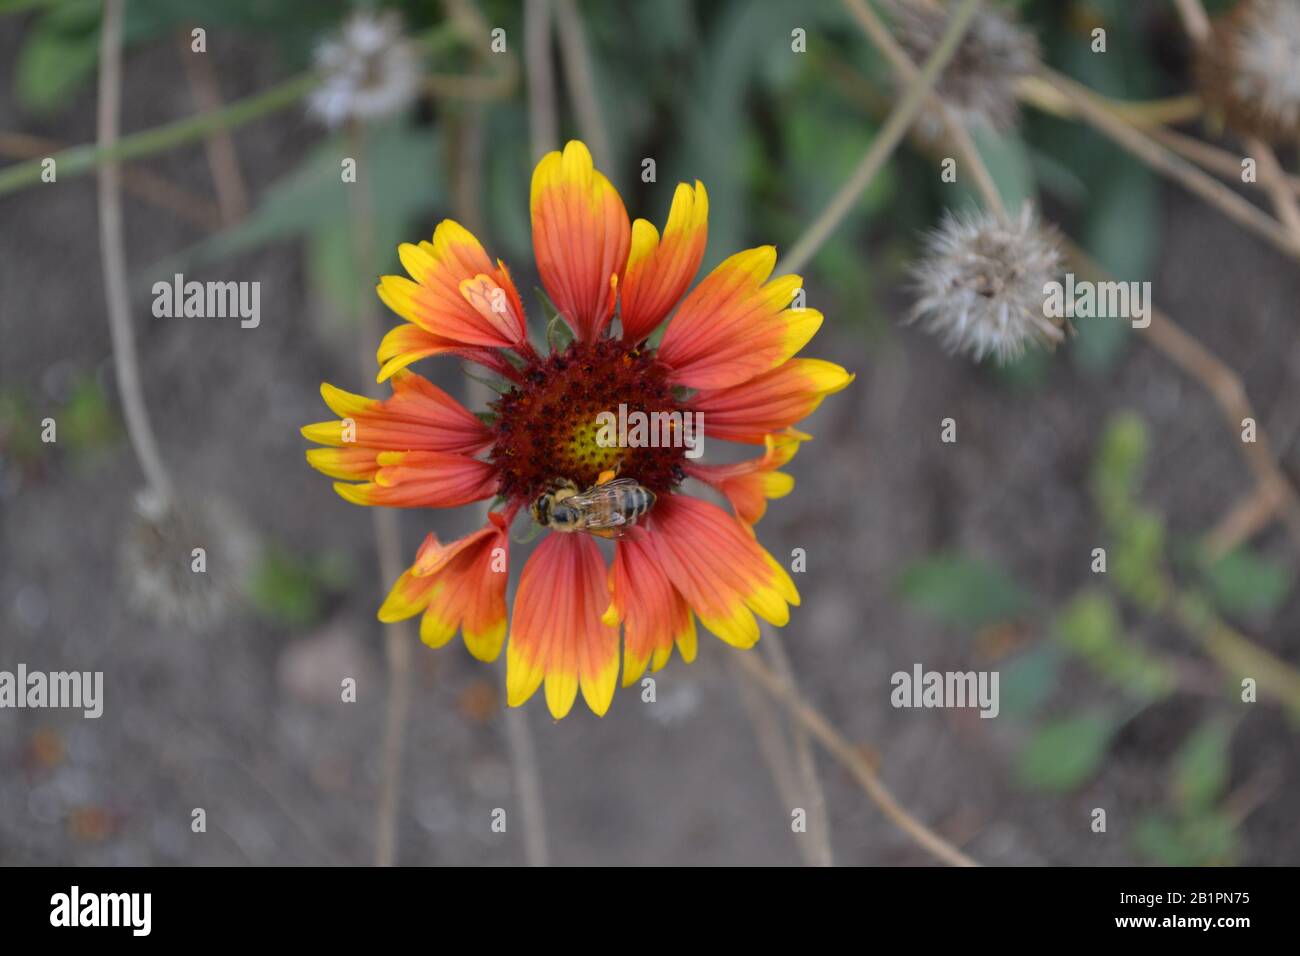 Gaillardia. G. hybrida Fanfare. A bee on a flower. Summer days. Flowerbed with flowers. Green leaves. Horizontal photo Stock Photo